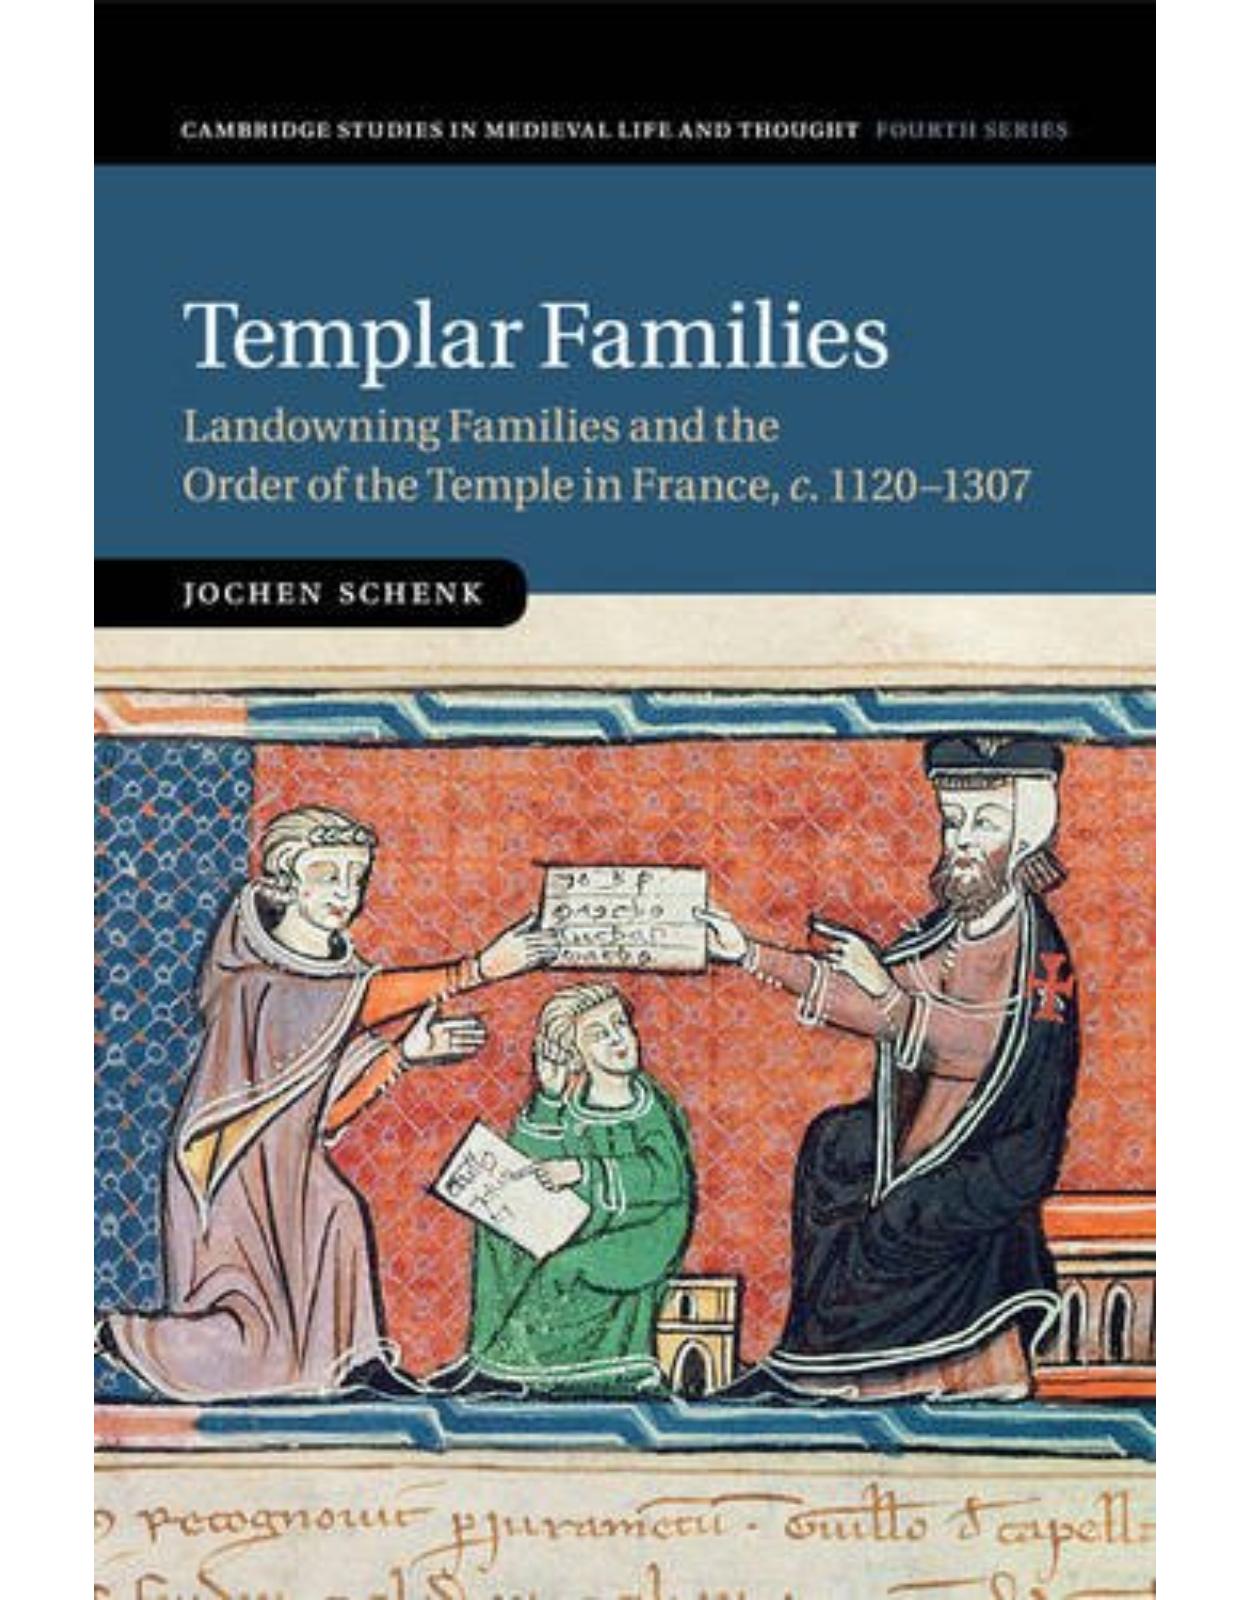 Templar Families: Landowning Families and the Order of the Temple in France, c.1120-1307 (Cambridge Studies in Medieval Life and Thought: Fourth Series)